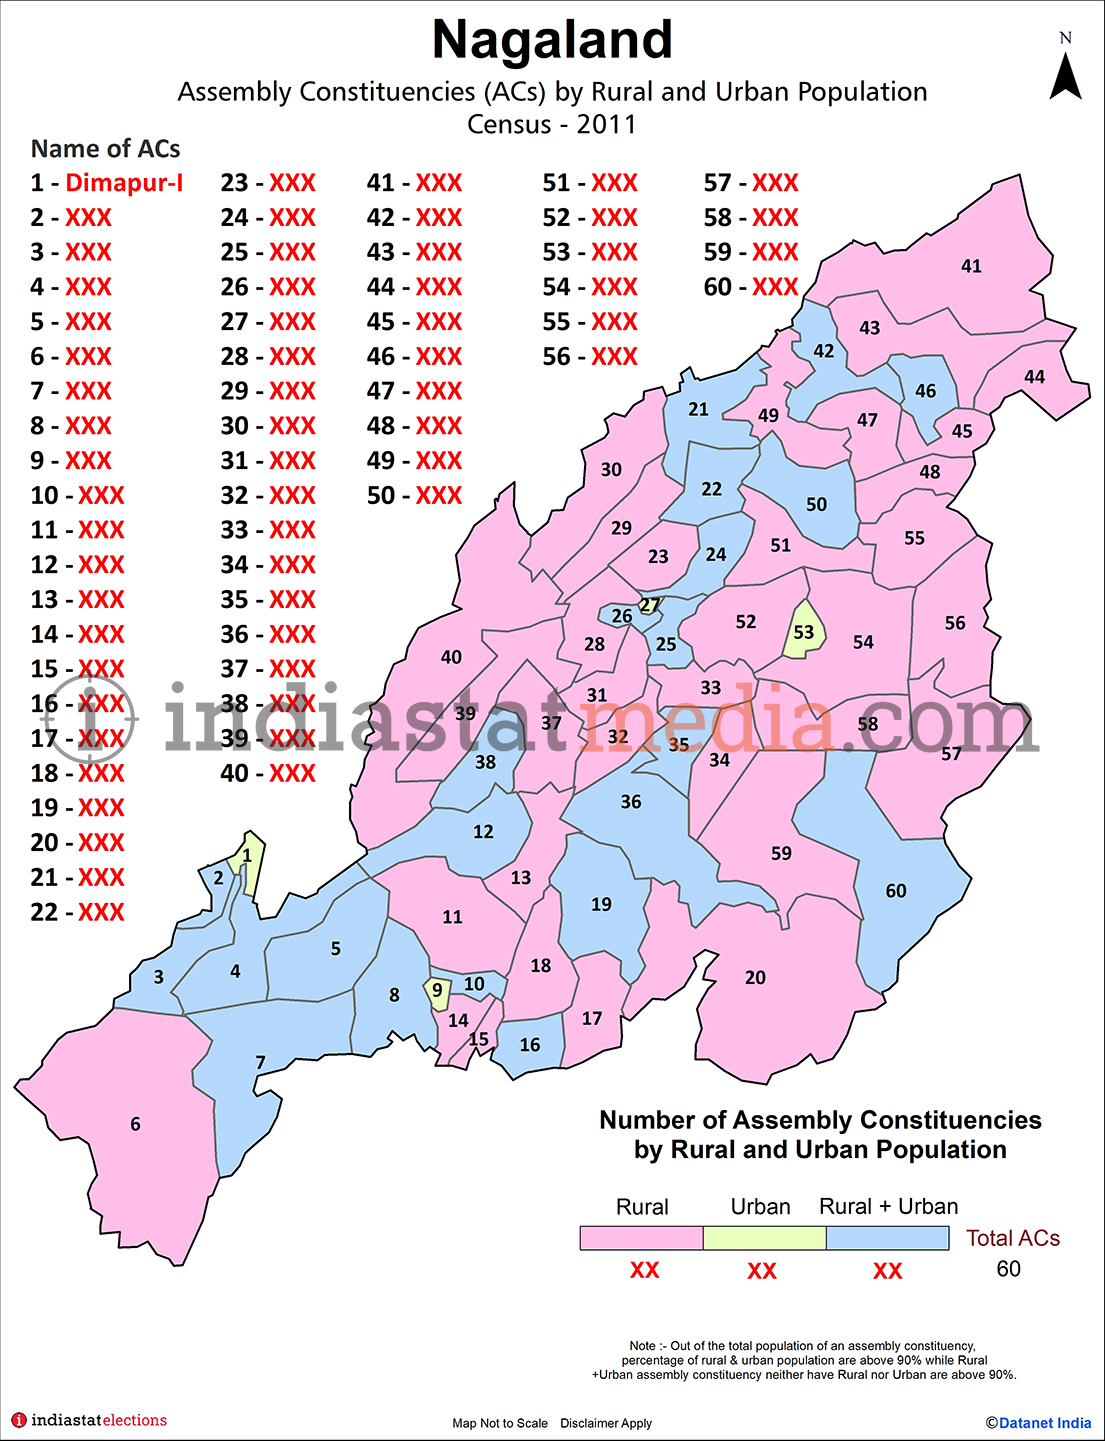 Assembly Constituencies (ACs) by Rural and Urban Population in Nagaland - Census 2011